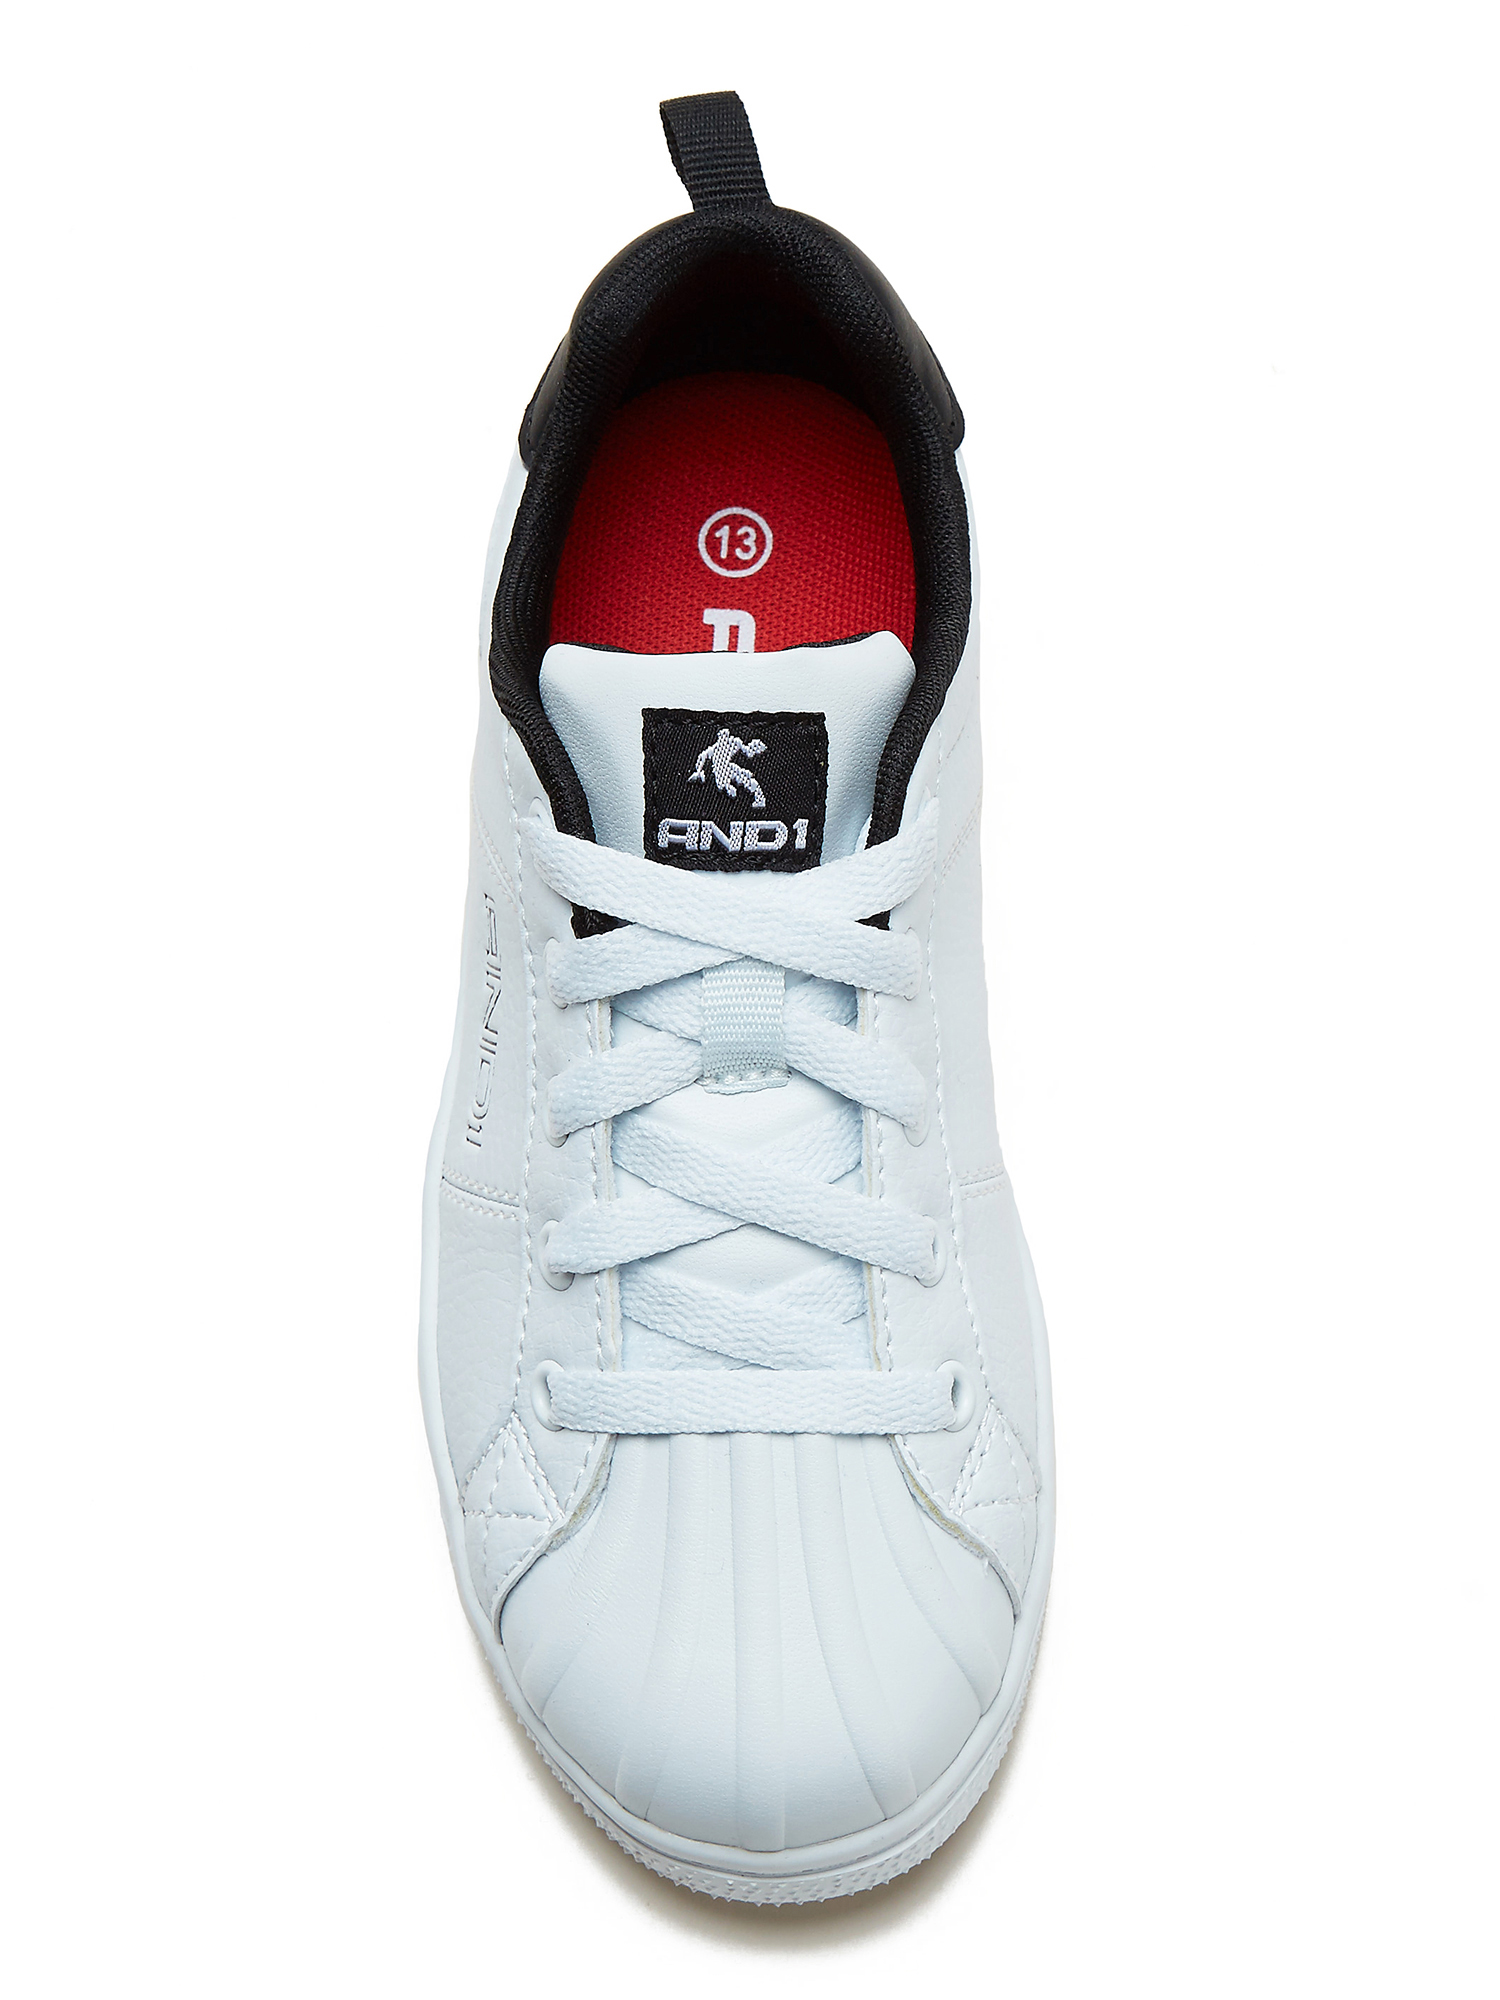 Boys' Meister Casual Court Shoe - image 3 of 5